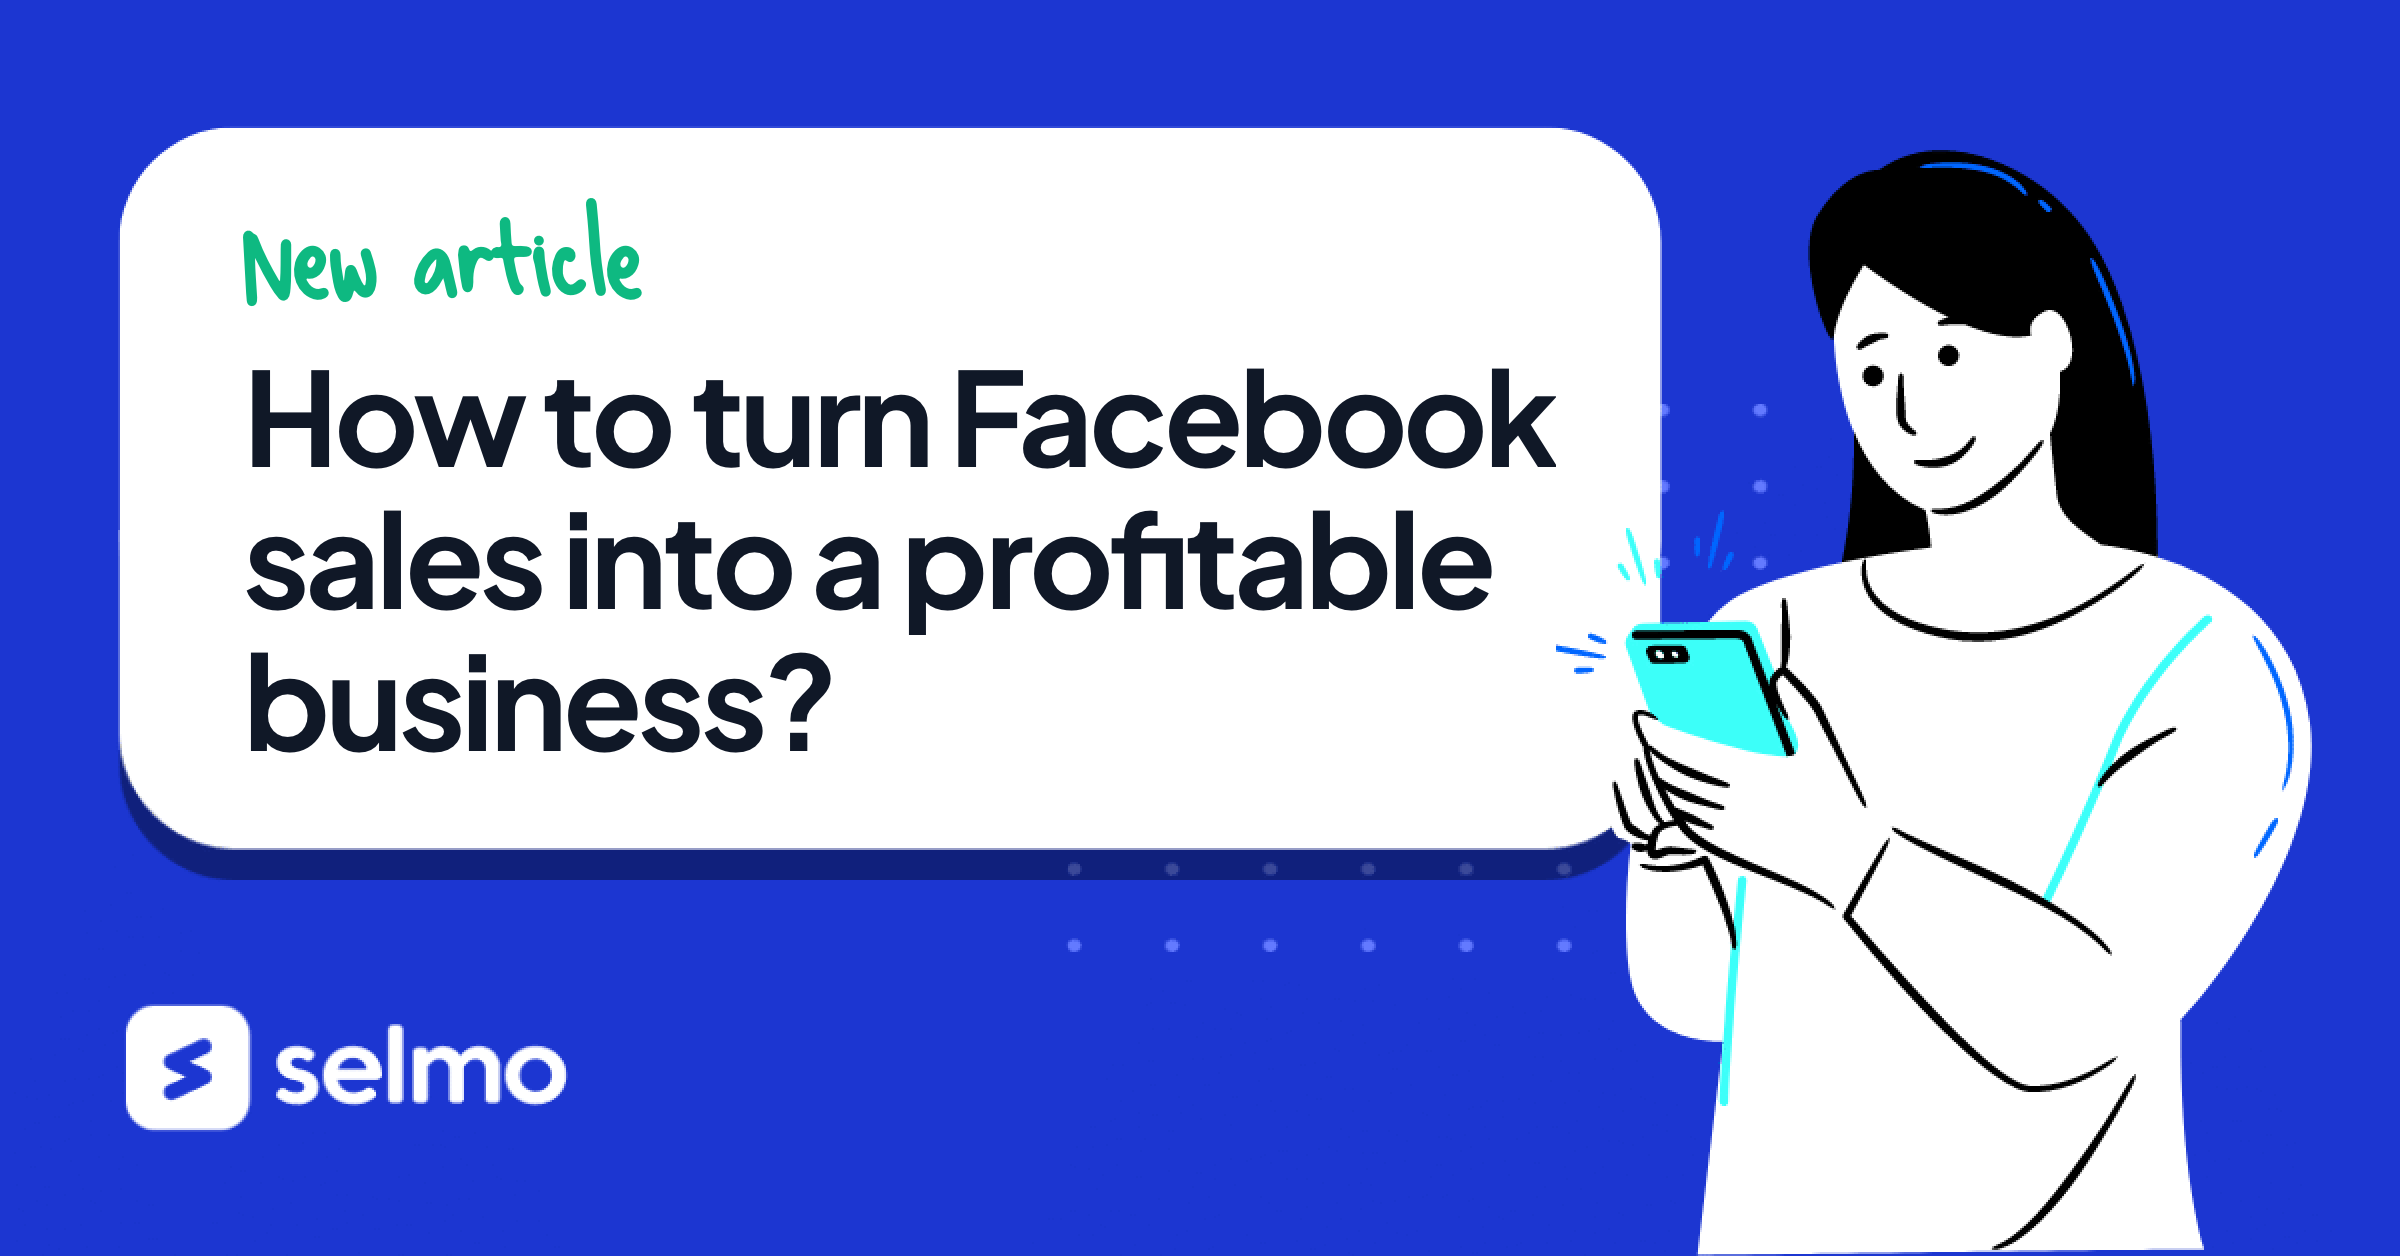 How to turn Facebook sales into a profitable business?